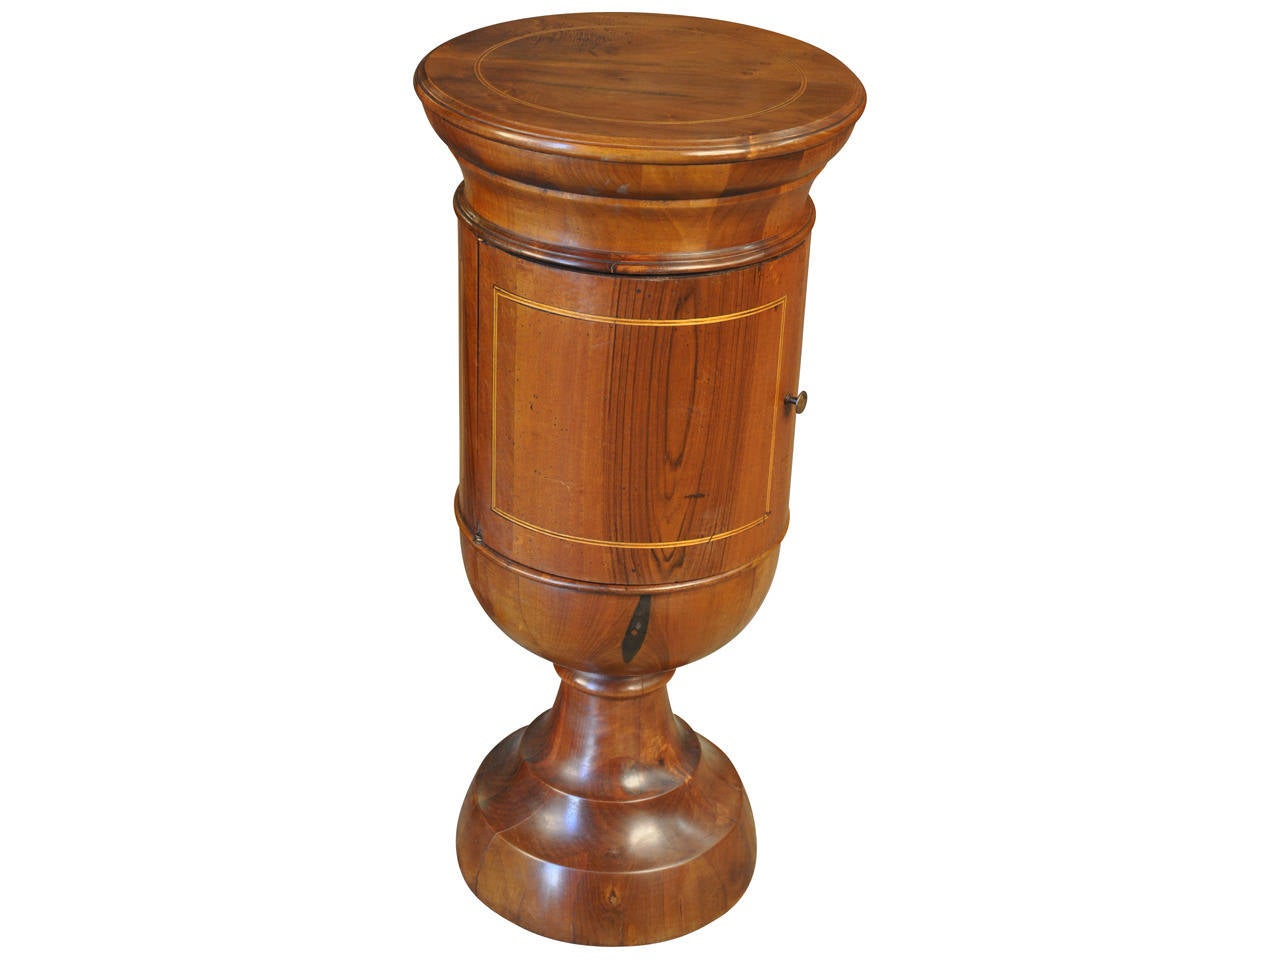 A stunning late 19th century Italian Cylinder Side Table. Beautifully constructed from walnut with fruit wood inlay.  Molded top over cylinder body with door on turned pedestal foot.